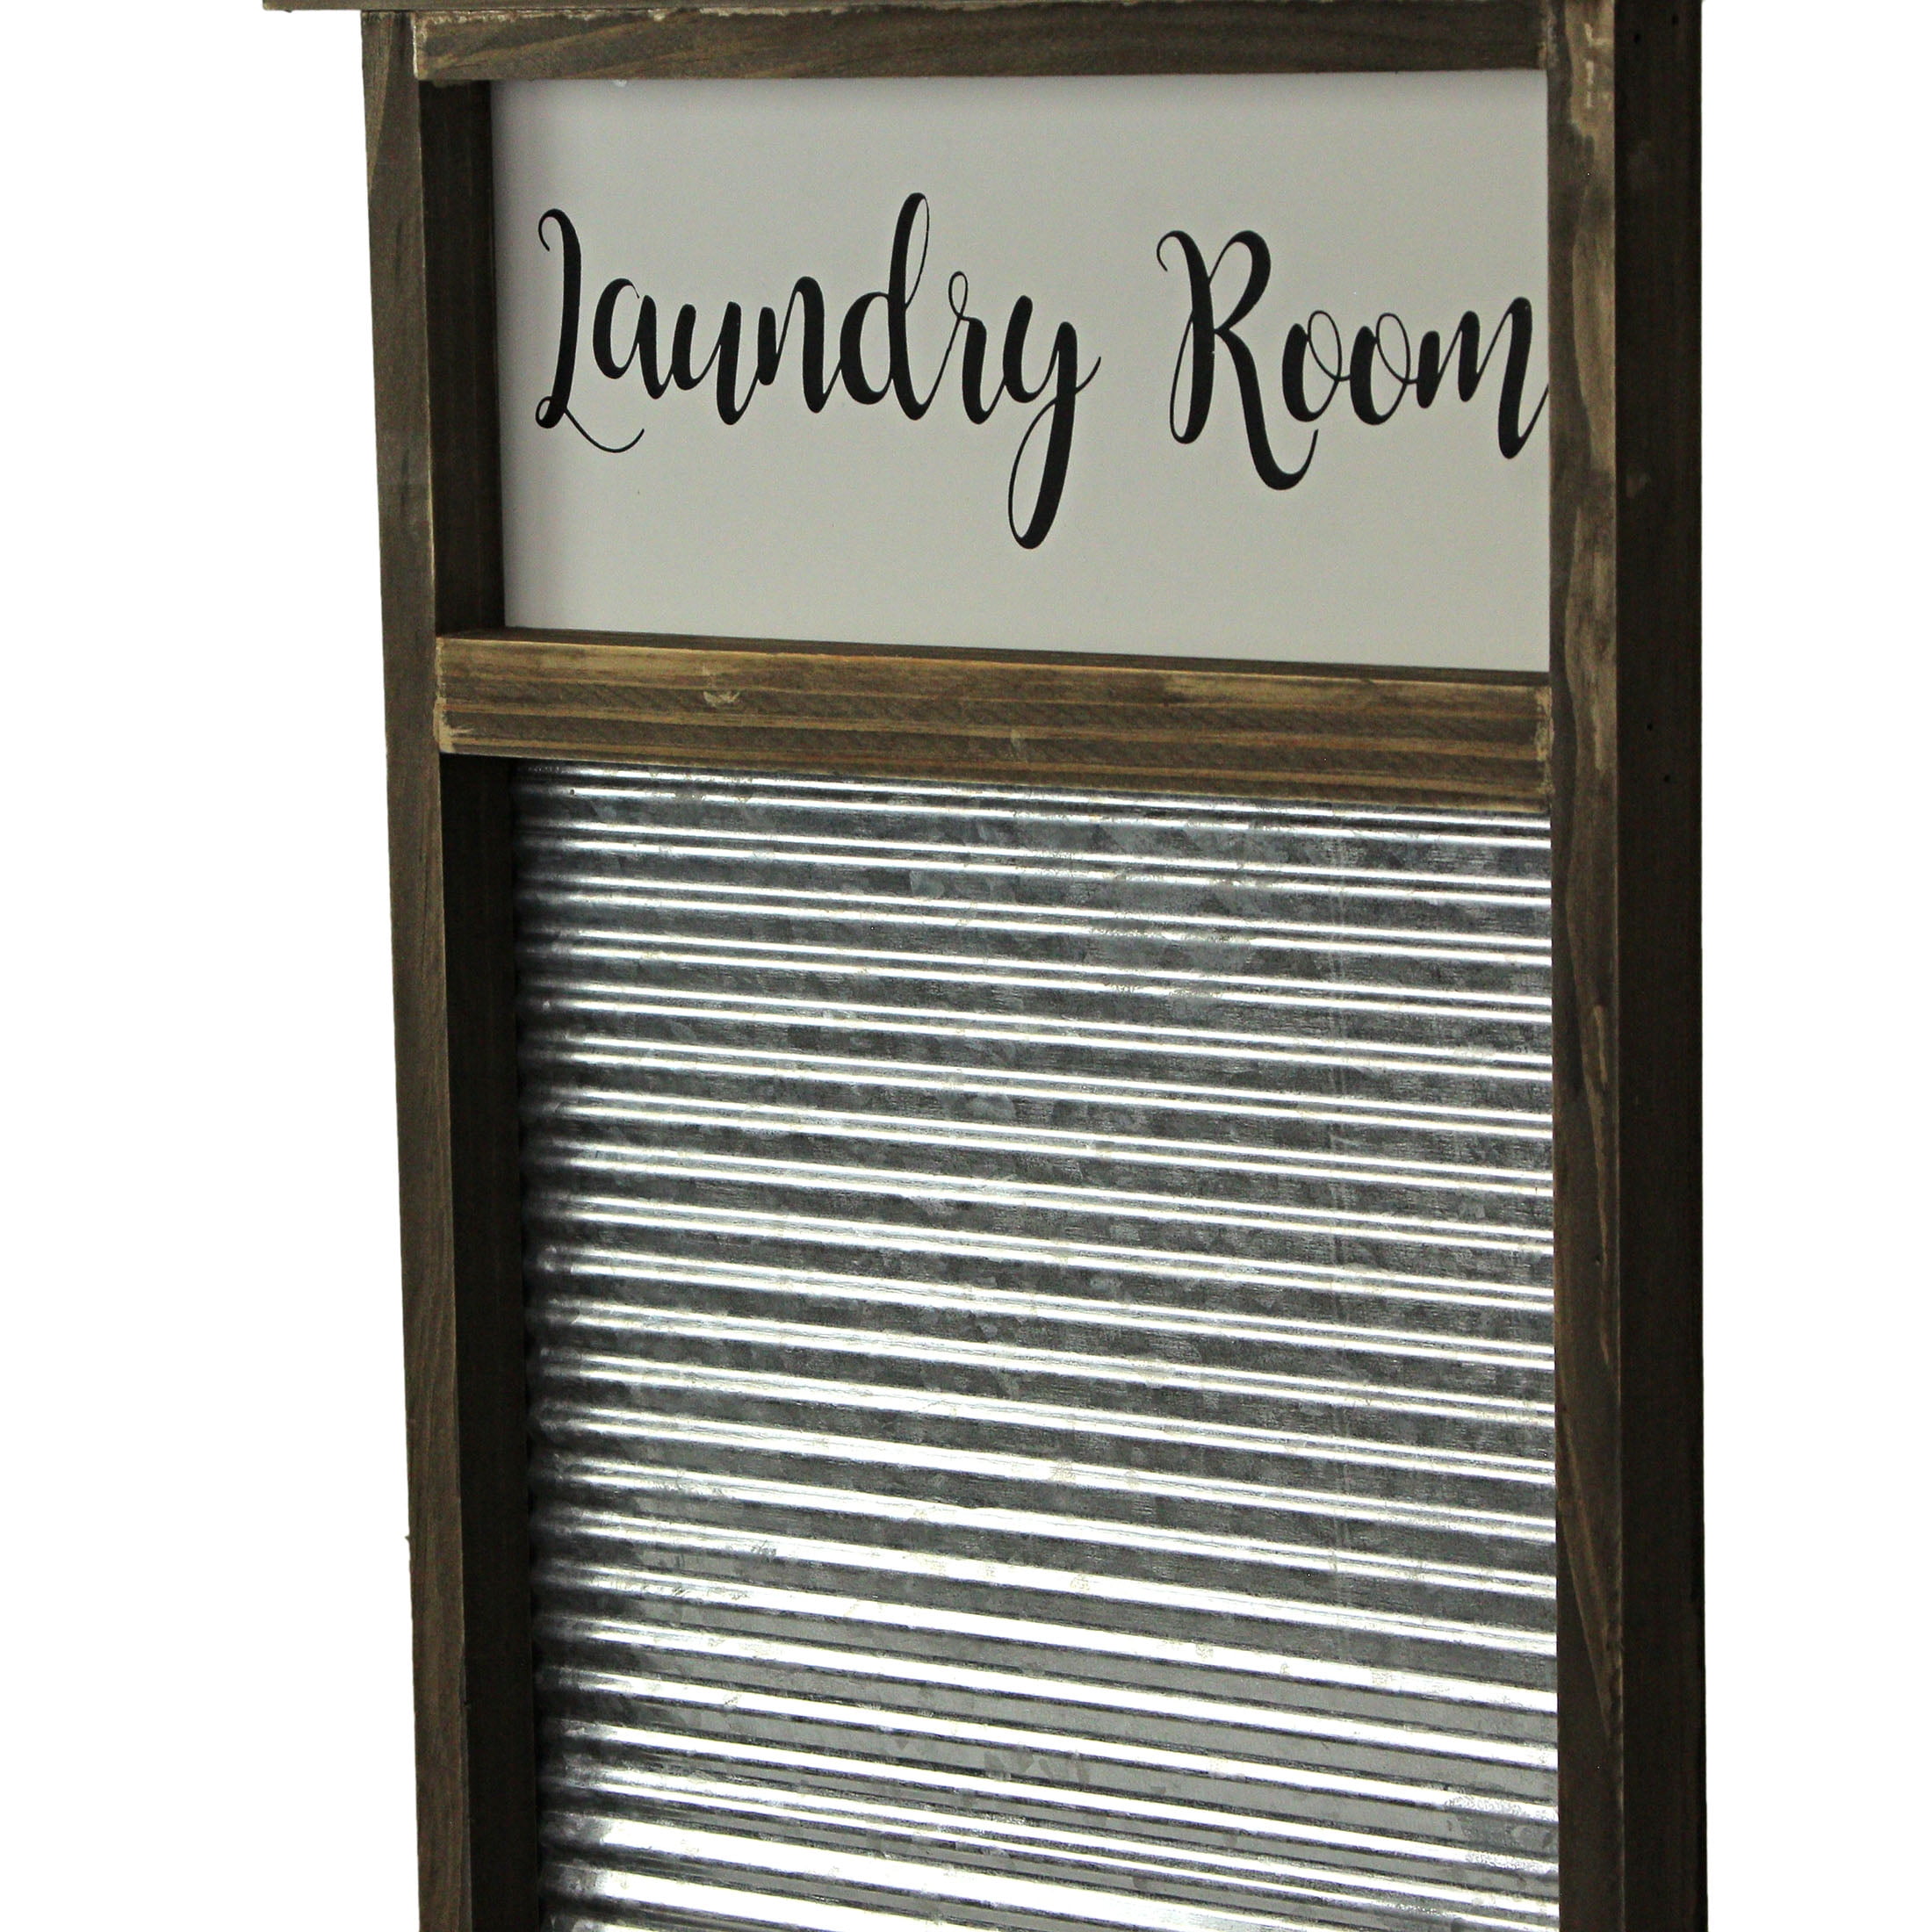 Vintage Washboard Laundry Day Canvas Print